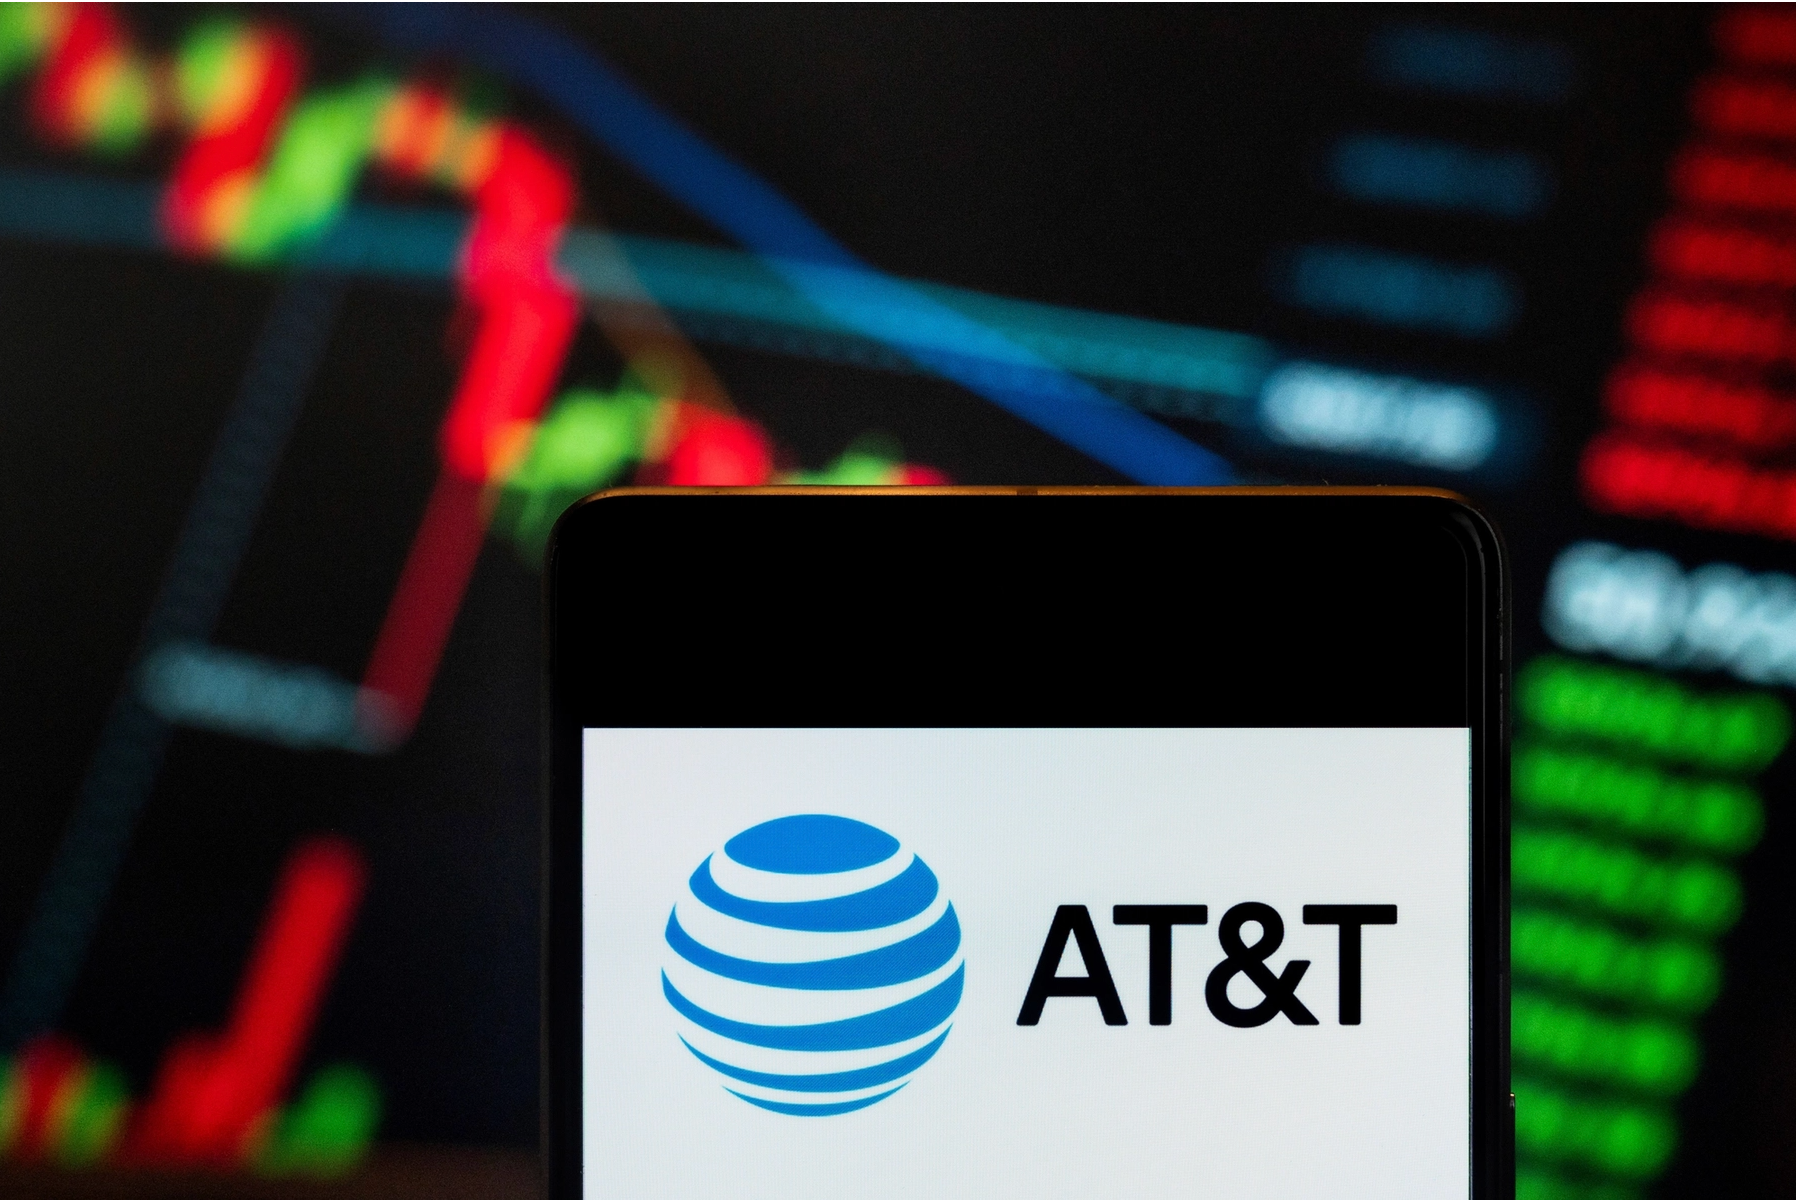 3 takeaways from the AT&T metadata breach